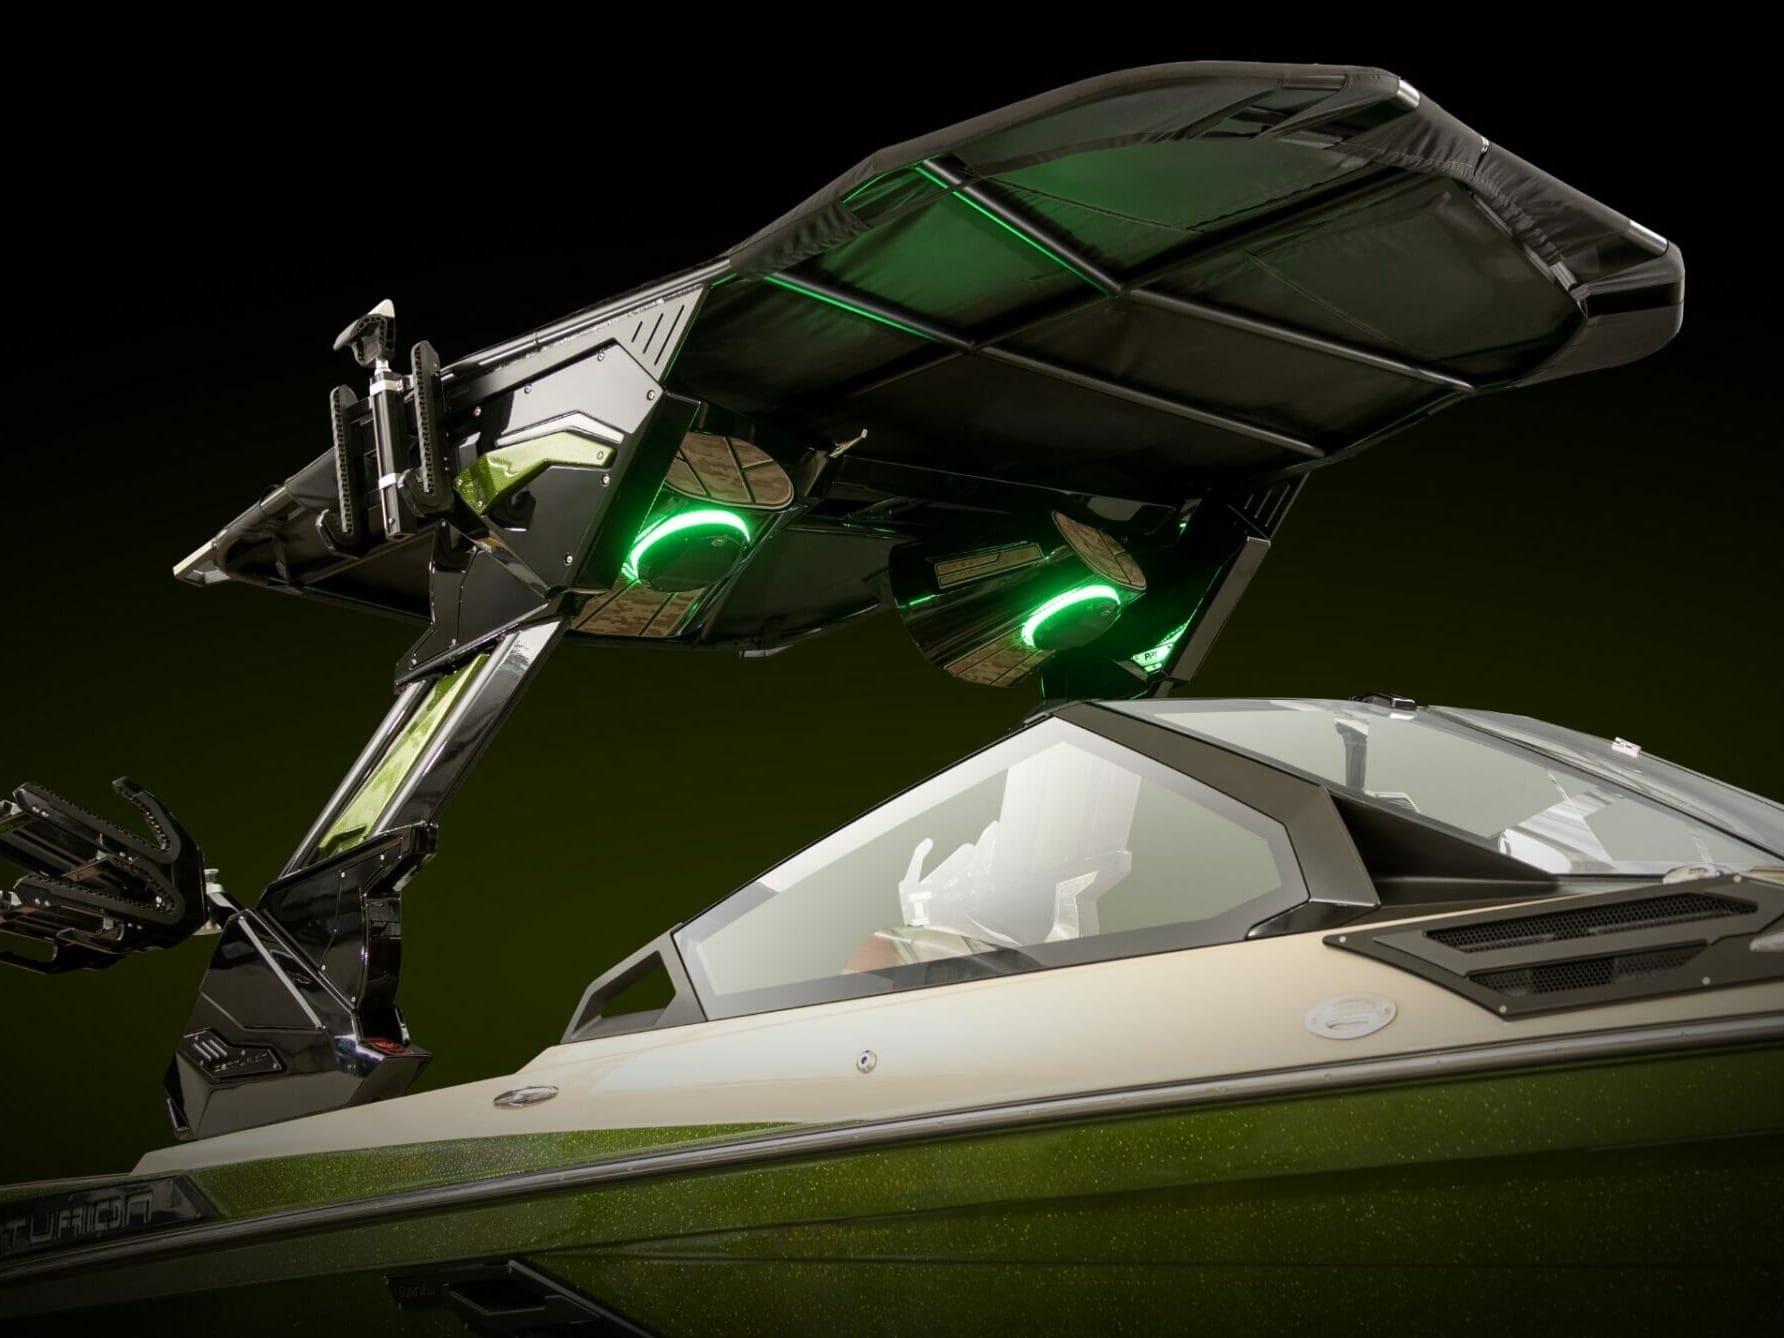 A wakesurf boat with a green light on top of it.